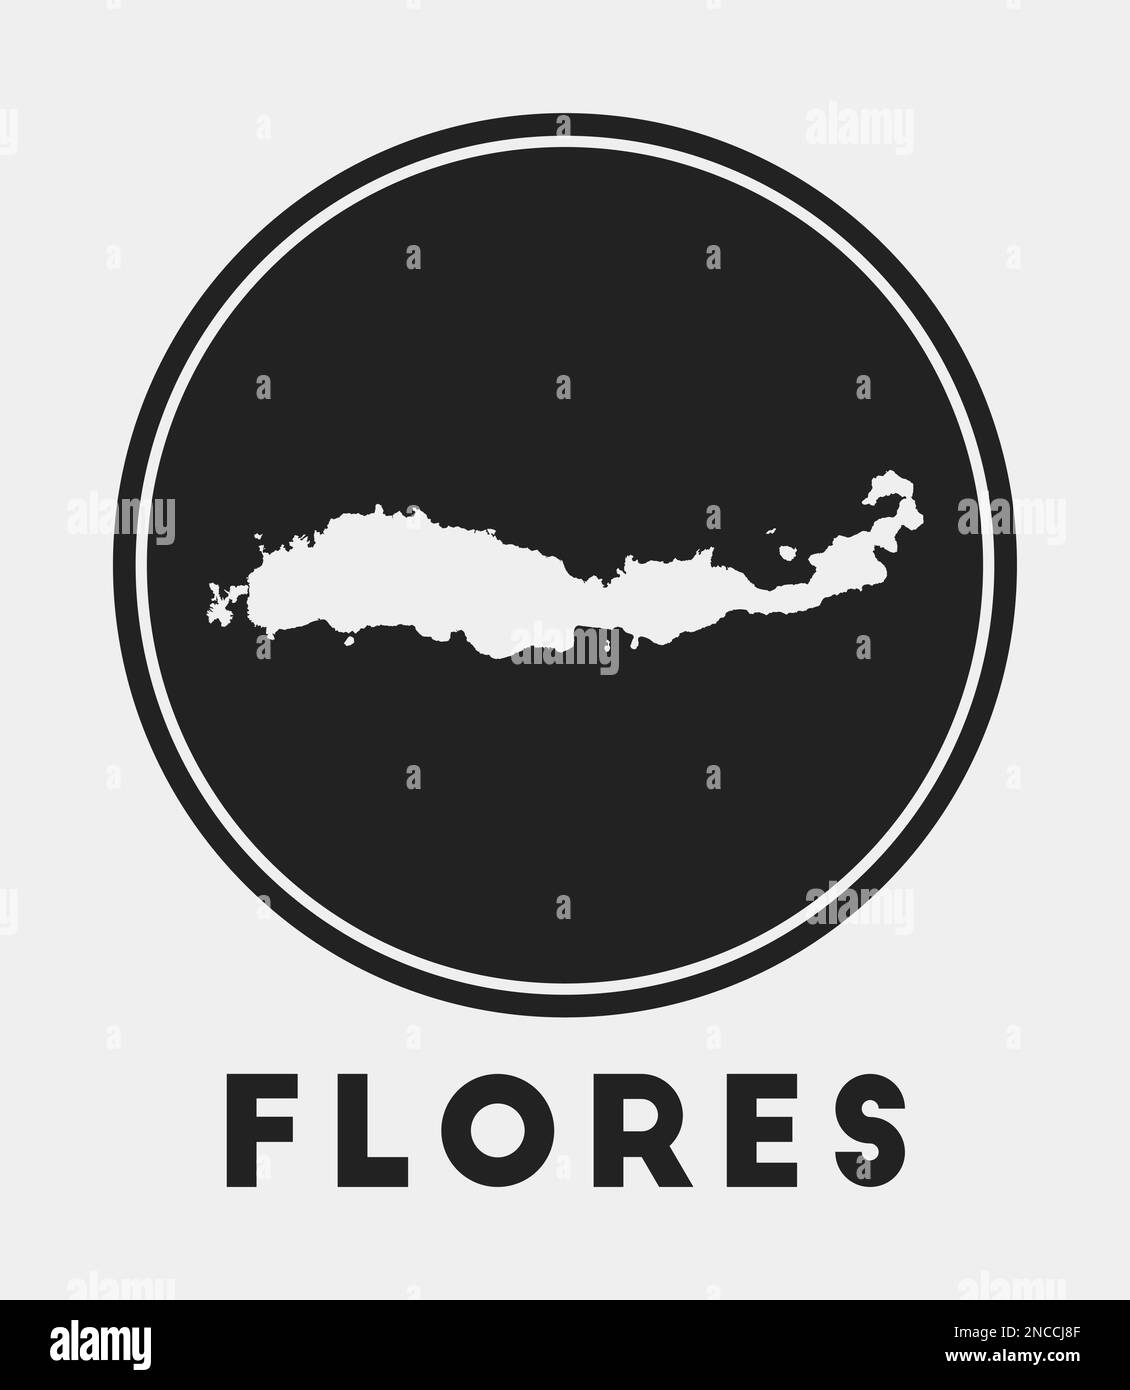 Flores icon. Round logo with island map and title. Stylish Flores badge ...